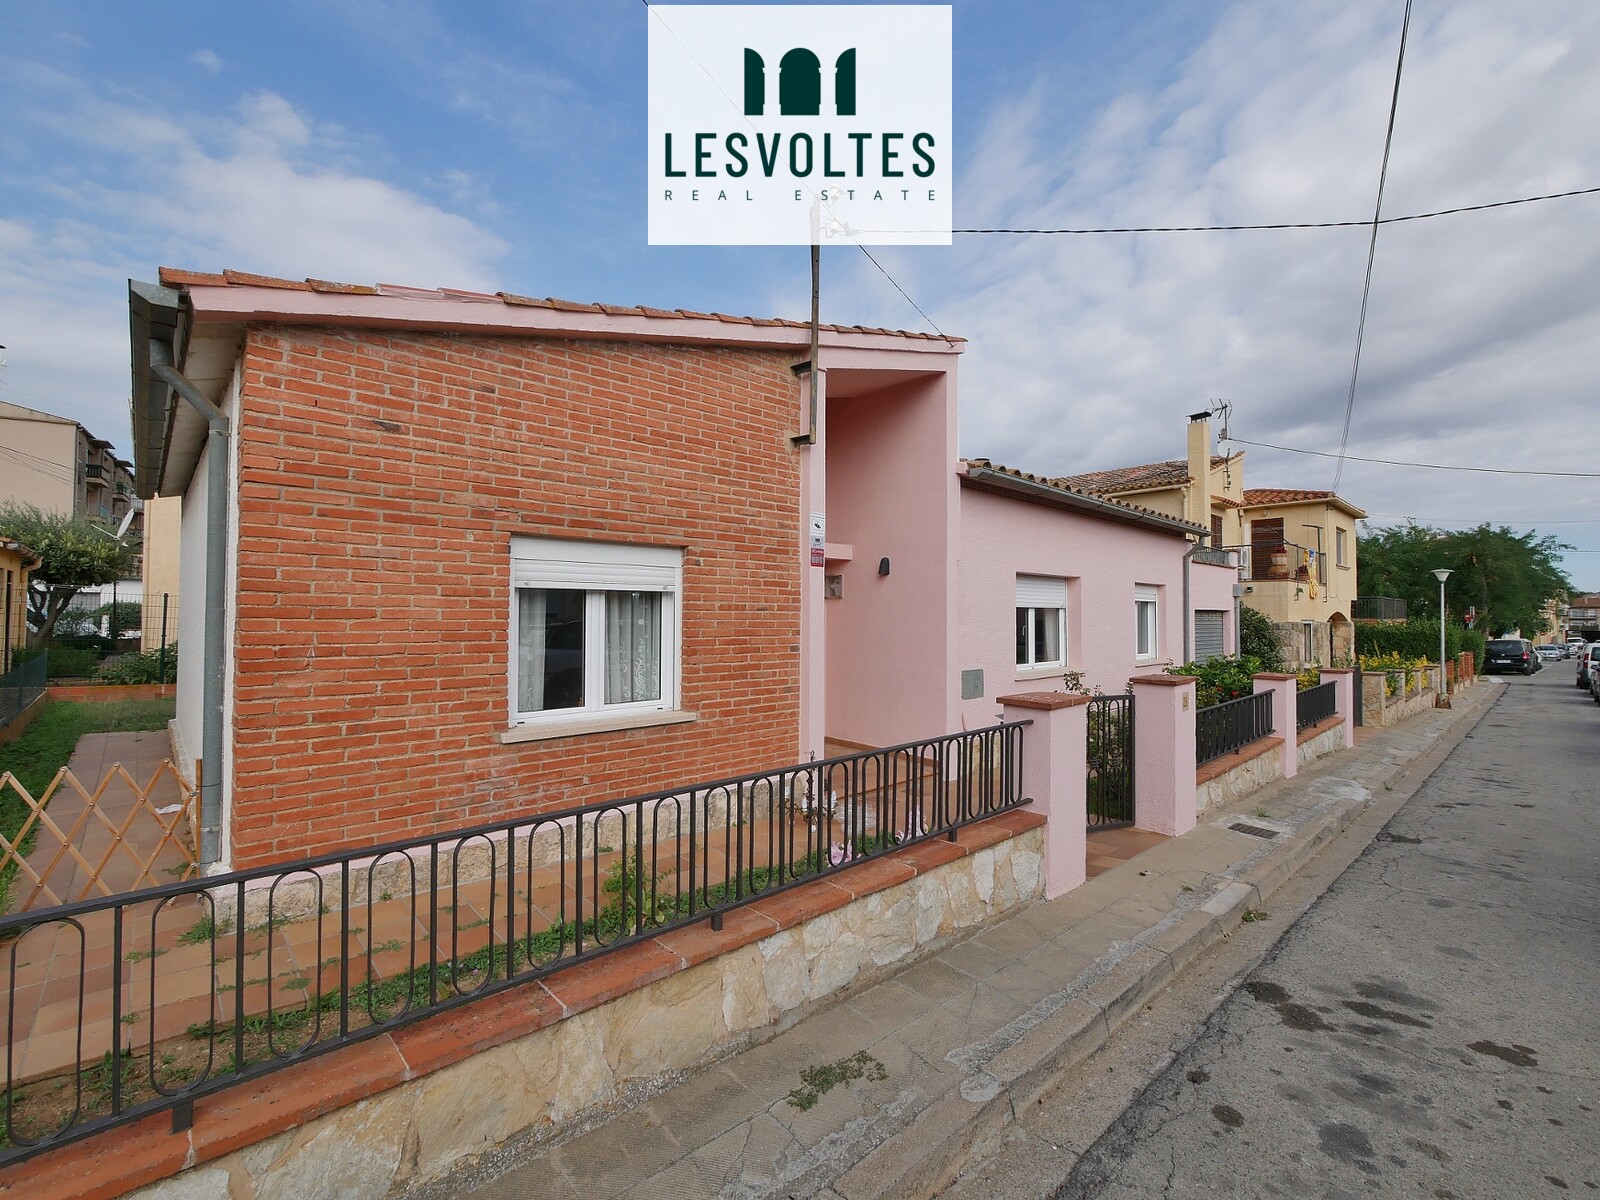 GROUND FLOOR HOUSE OF 112 M2, EQUIPPED AND FURNISHED, WITH GARDEN OF 166 M2, FOR SEASONAL RENTAL FOR 9 MONTHS IN LA BISBAL.